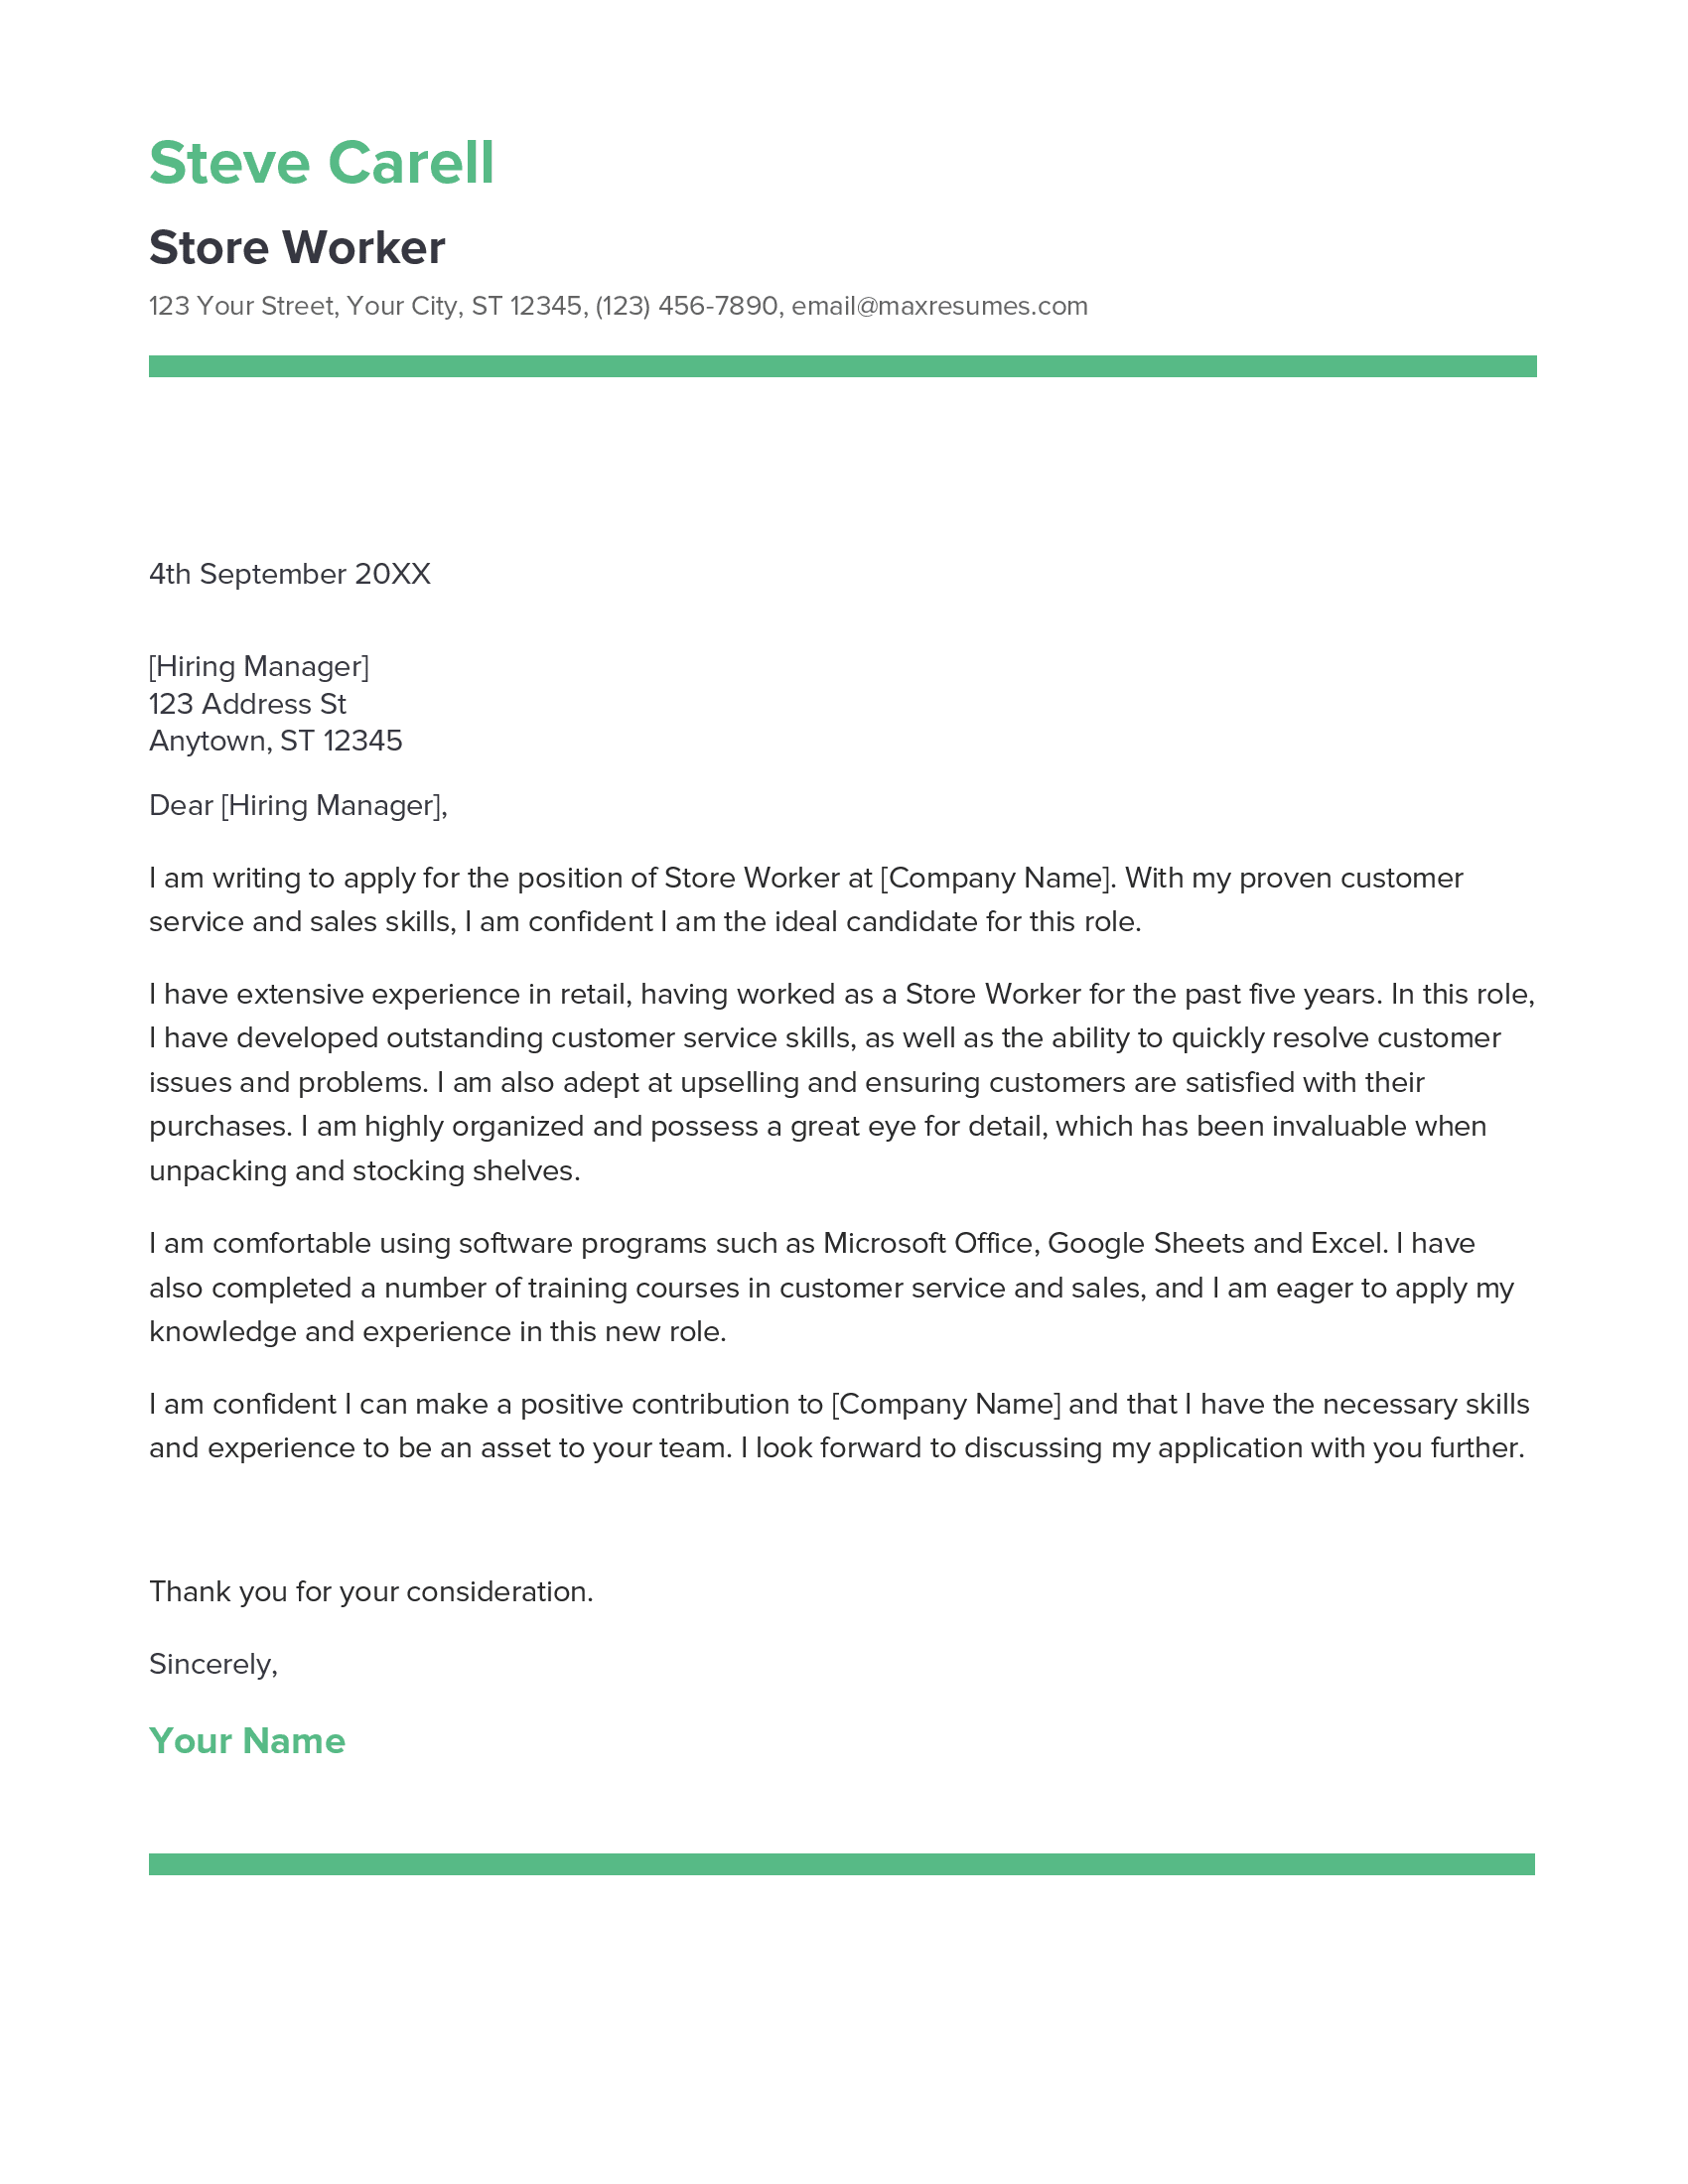 Store Worker Cover Letter Example